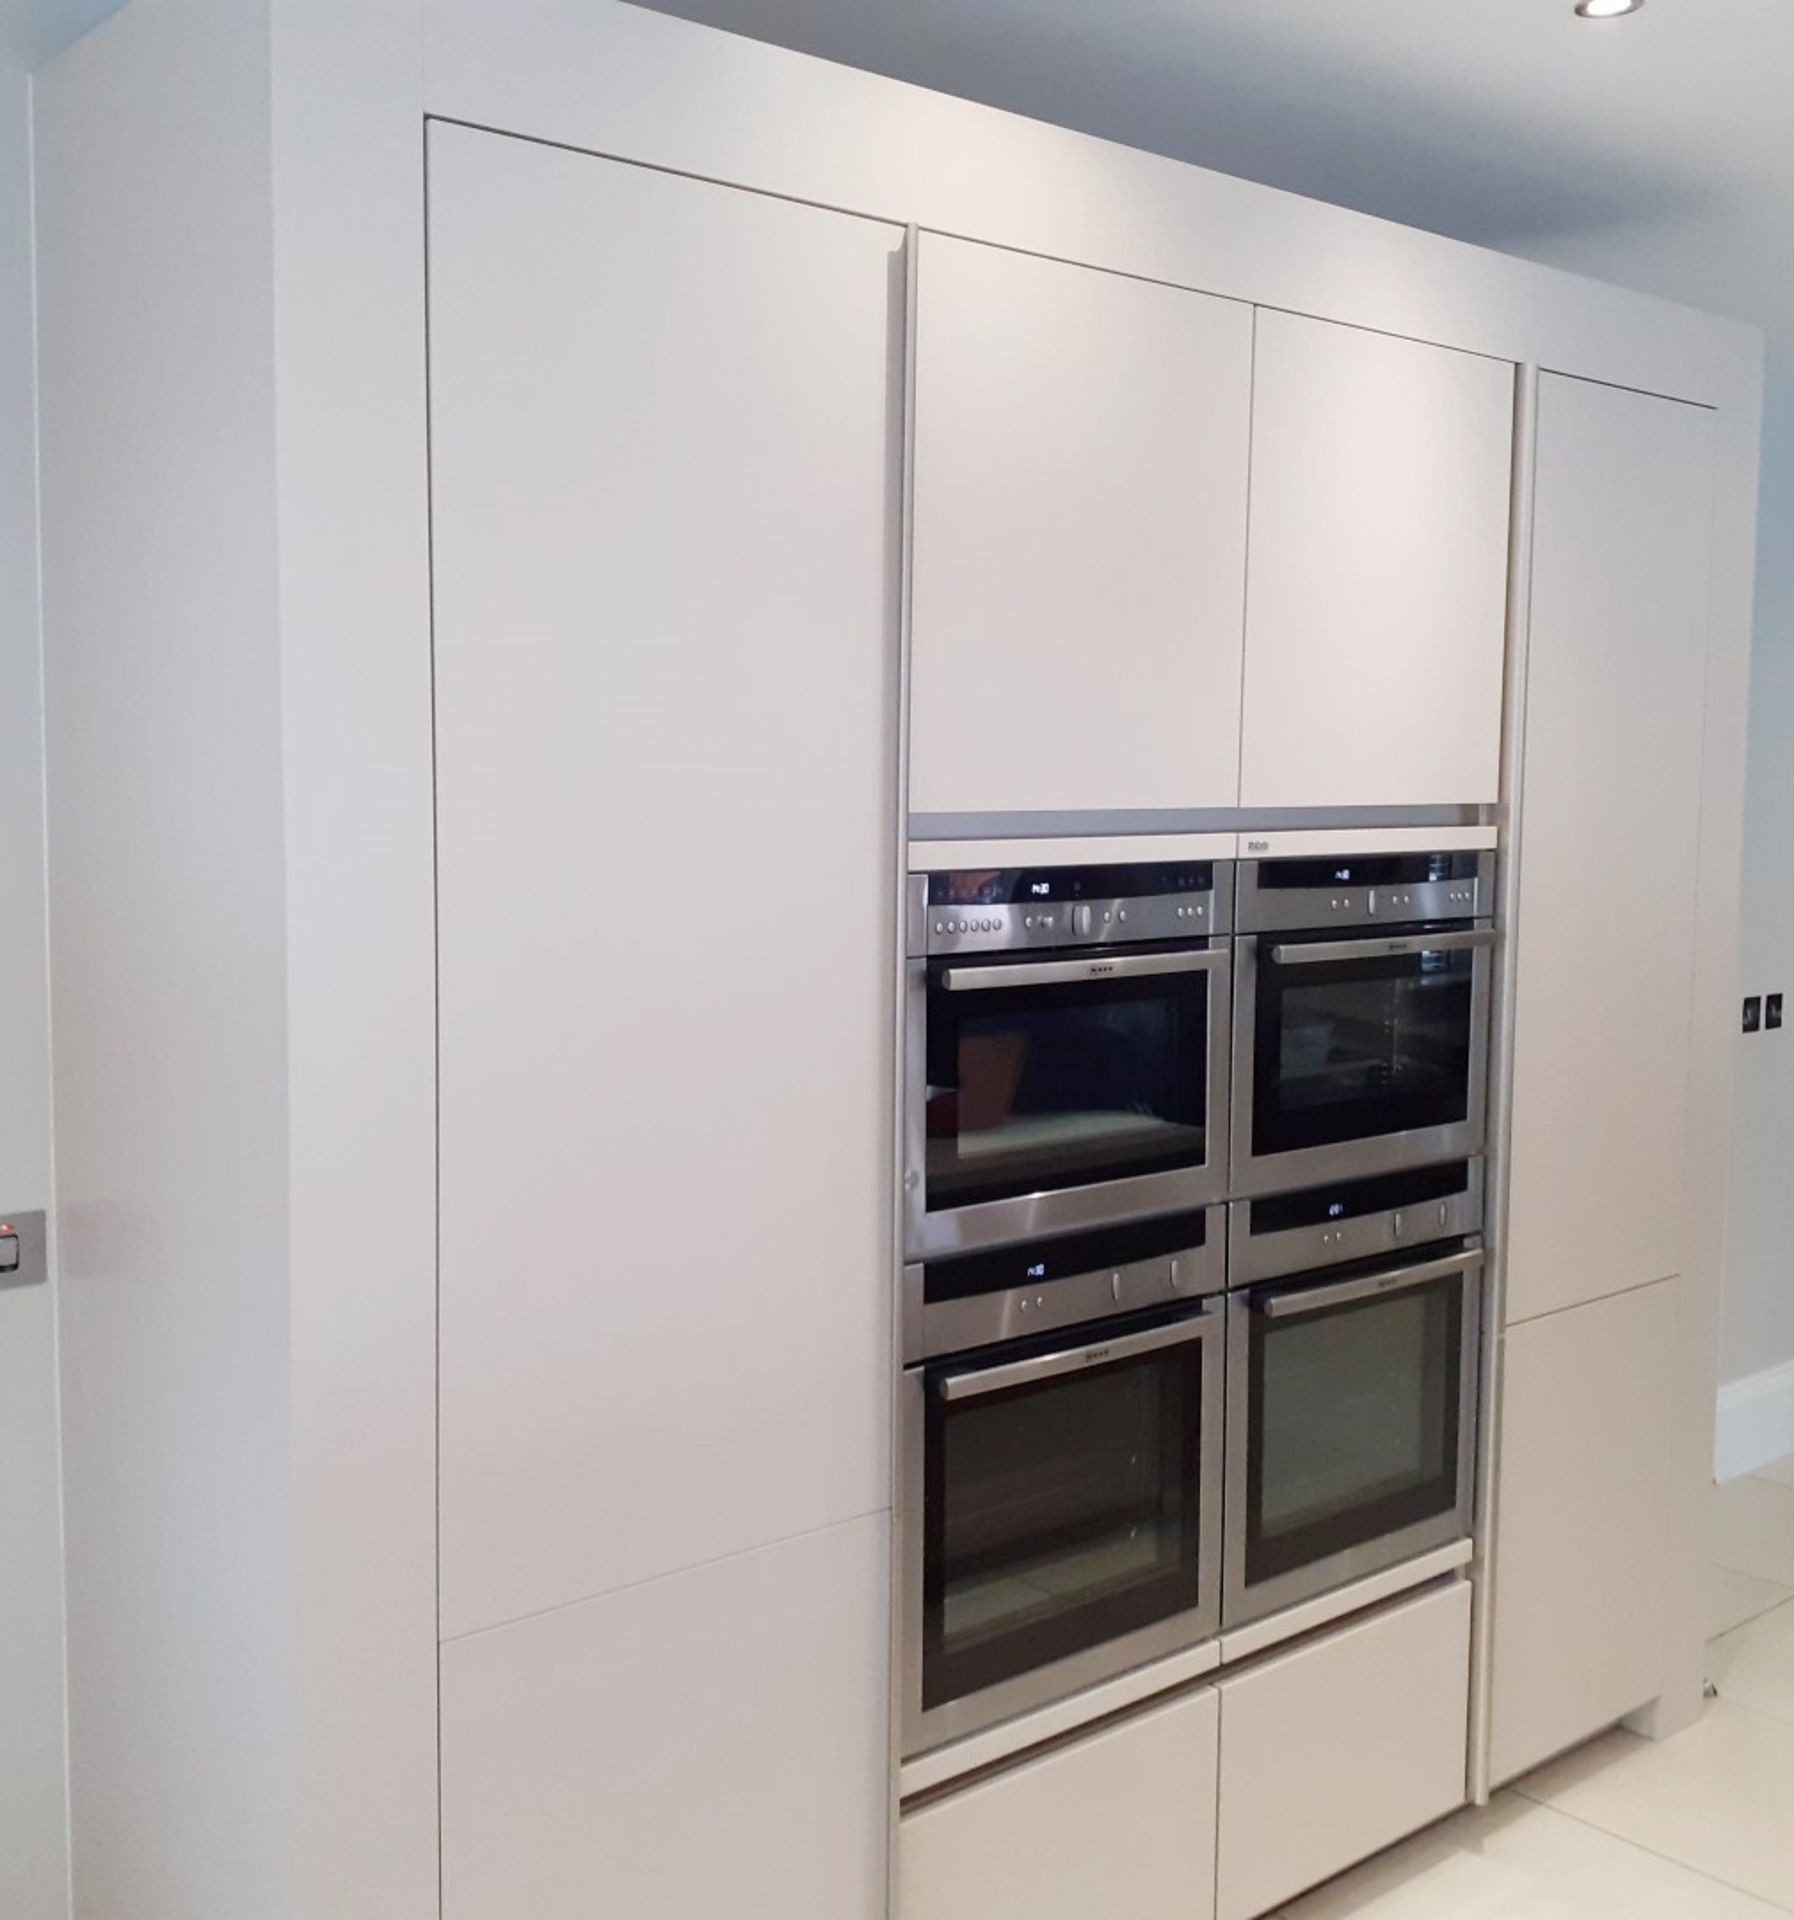 1 x SieMatic Handleless Fitted Kitchen With Intergrated NEFF Appliances, Corian Worktops And Island - Image 22 of 92